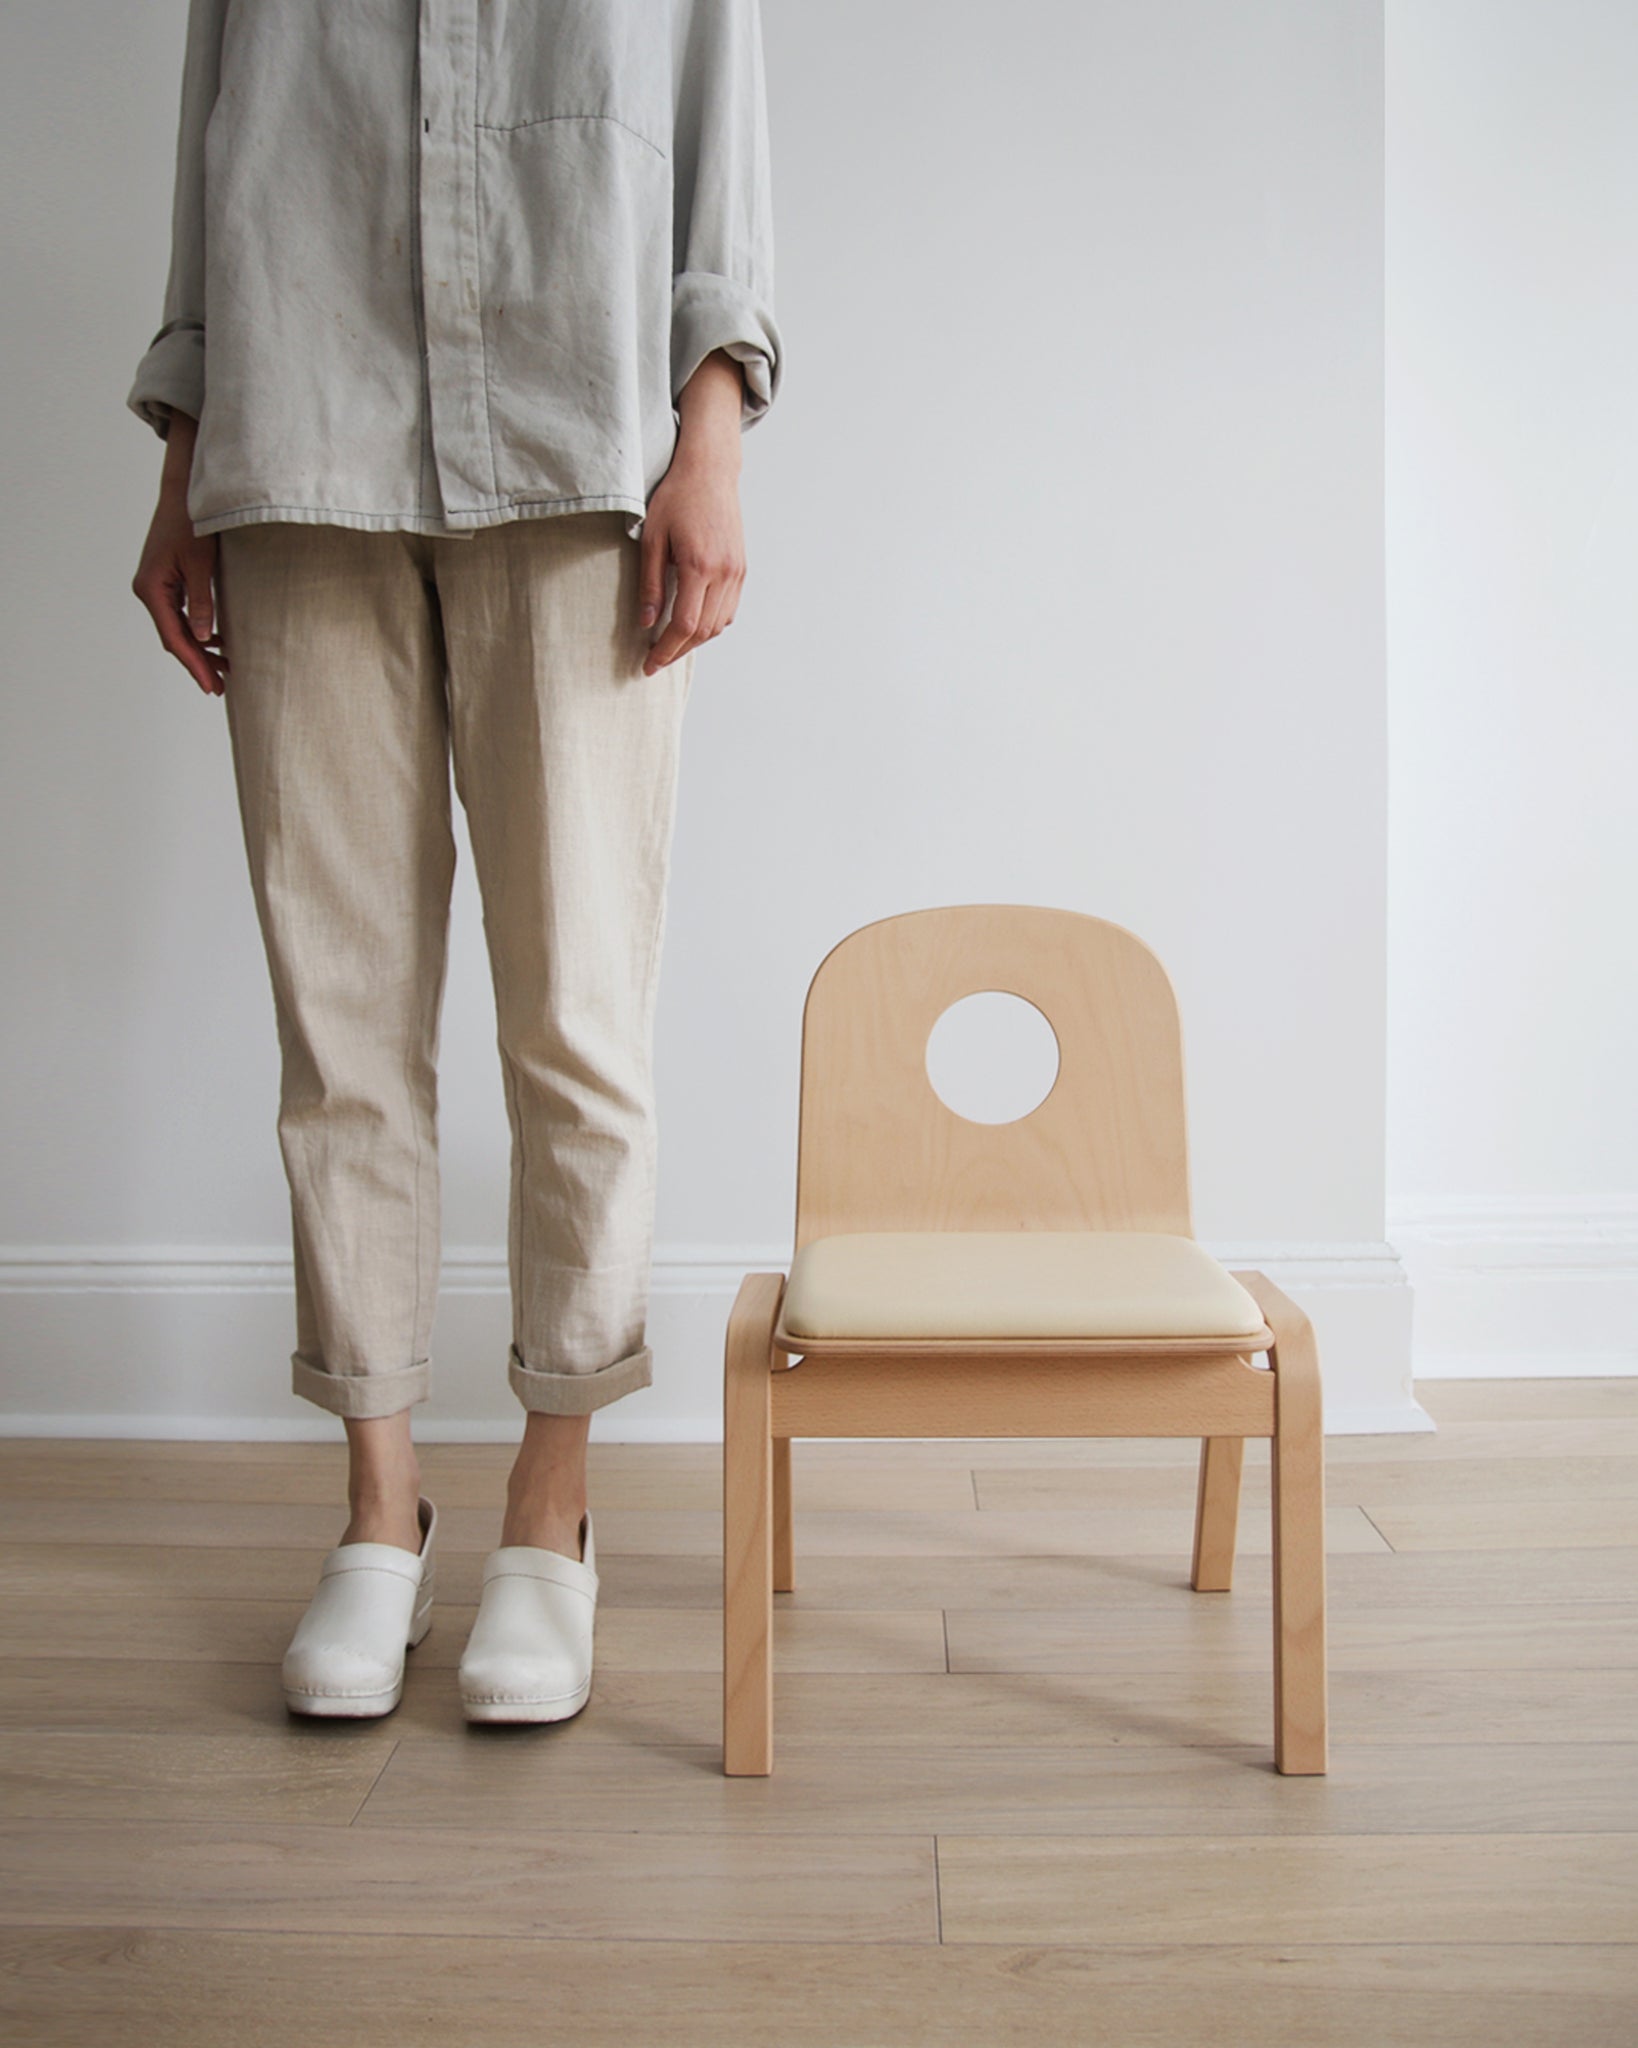 A woman in beige pants and gray shirt standing next to the Hole Children's Chair.